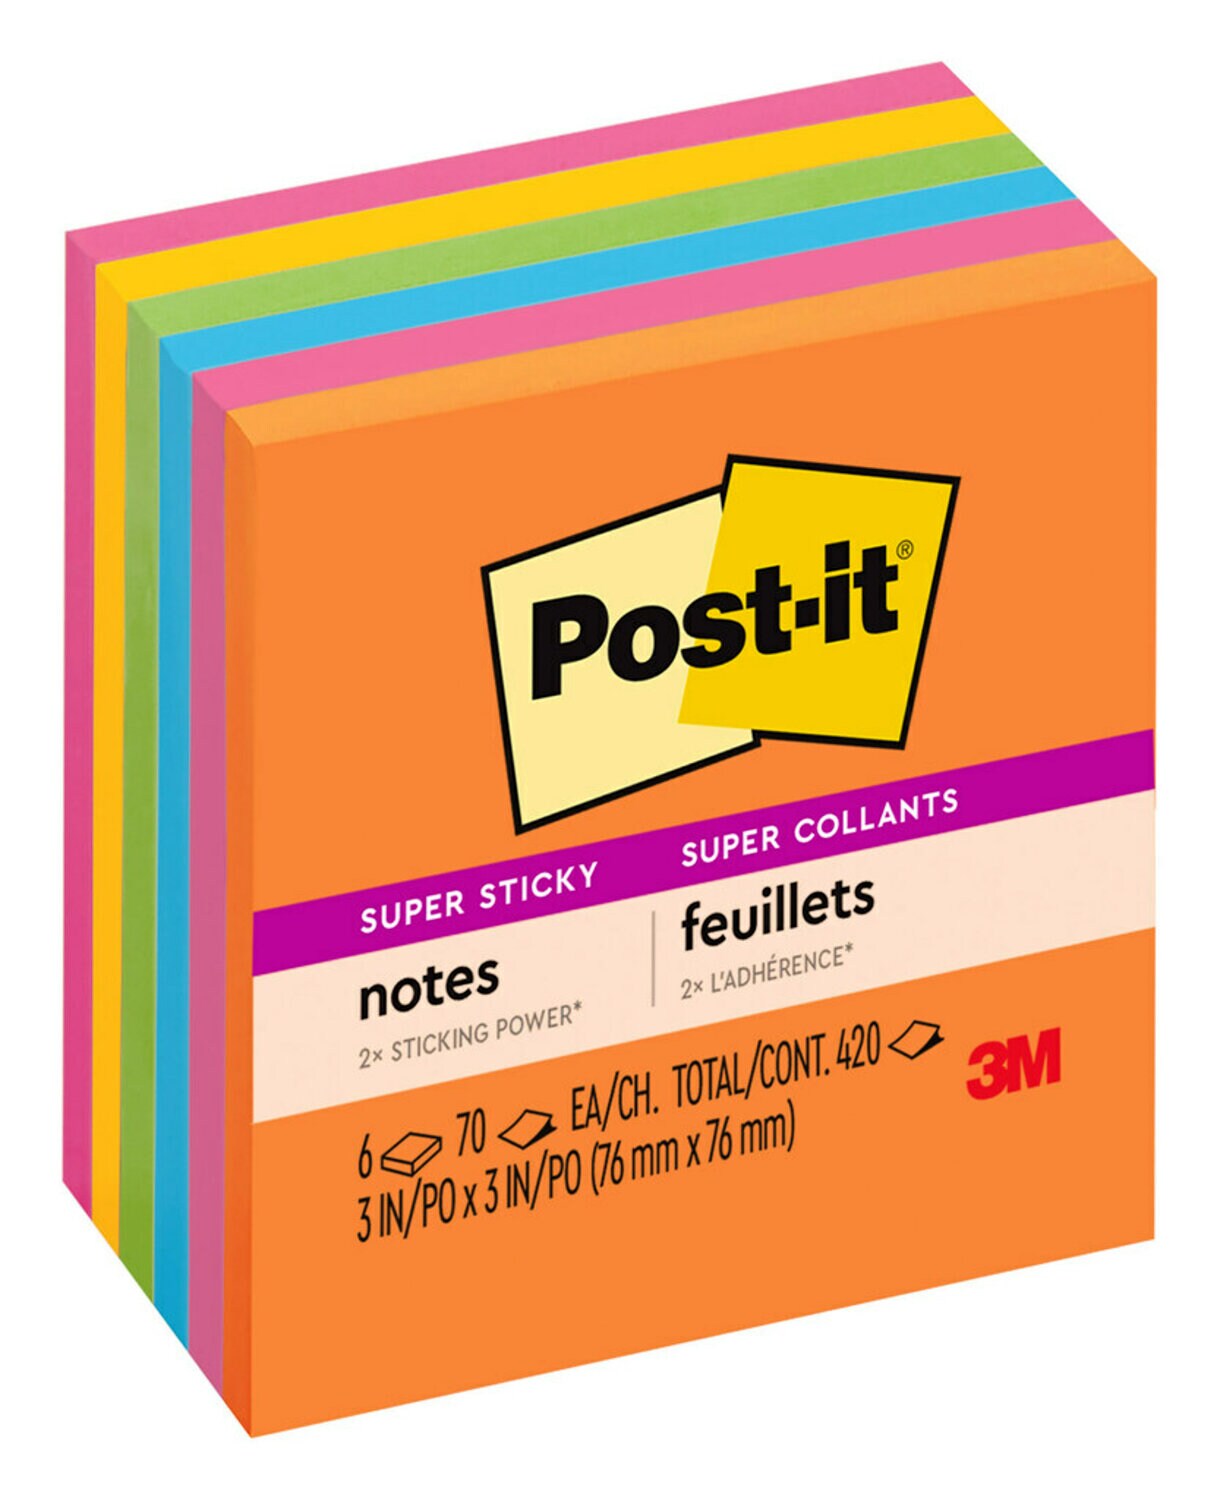 7100057827 - Post-it Super Sticky Notes 654-6SSAU, 3 in x 3 in (76 mm x 76 mm), 6 pads, 65 sheets/pad, Energy Boost Collection